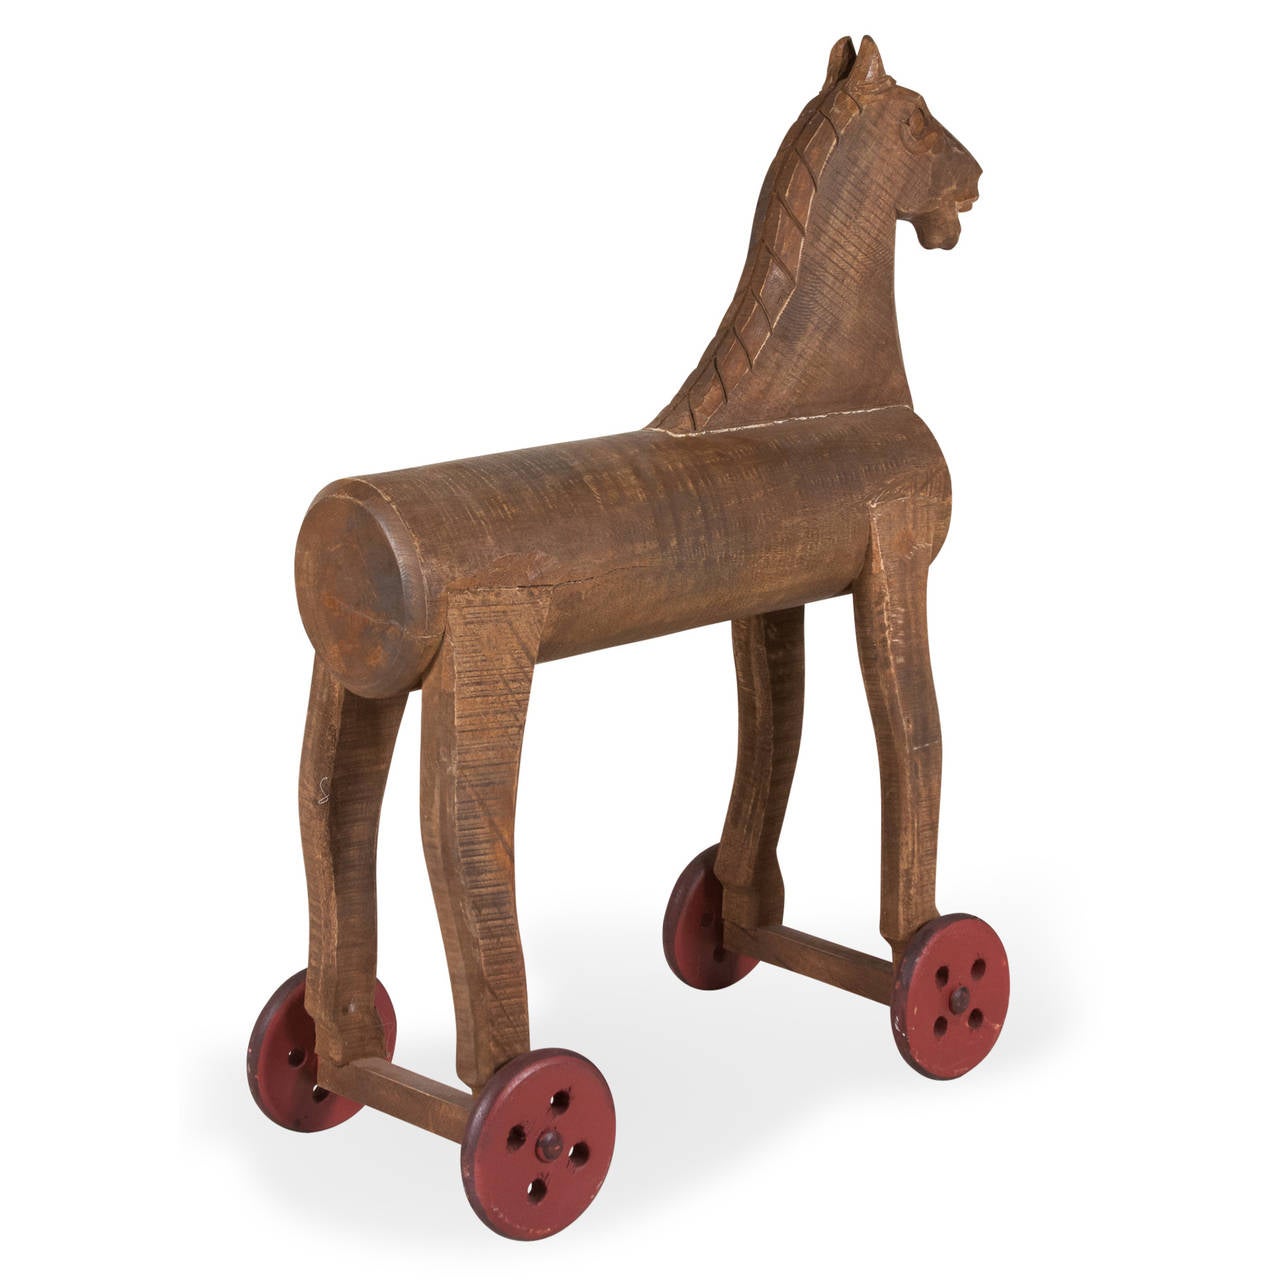 Wooden figure of a horse, natural colored wood body with red painted wheels as feet. Wheels do not turn. American, 1st half 20th century. Length 24 in, width 10 in, height 30 in. (Item #2270)